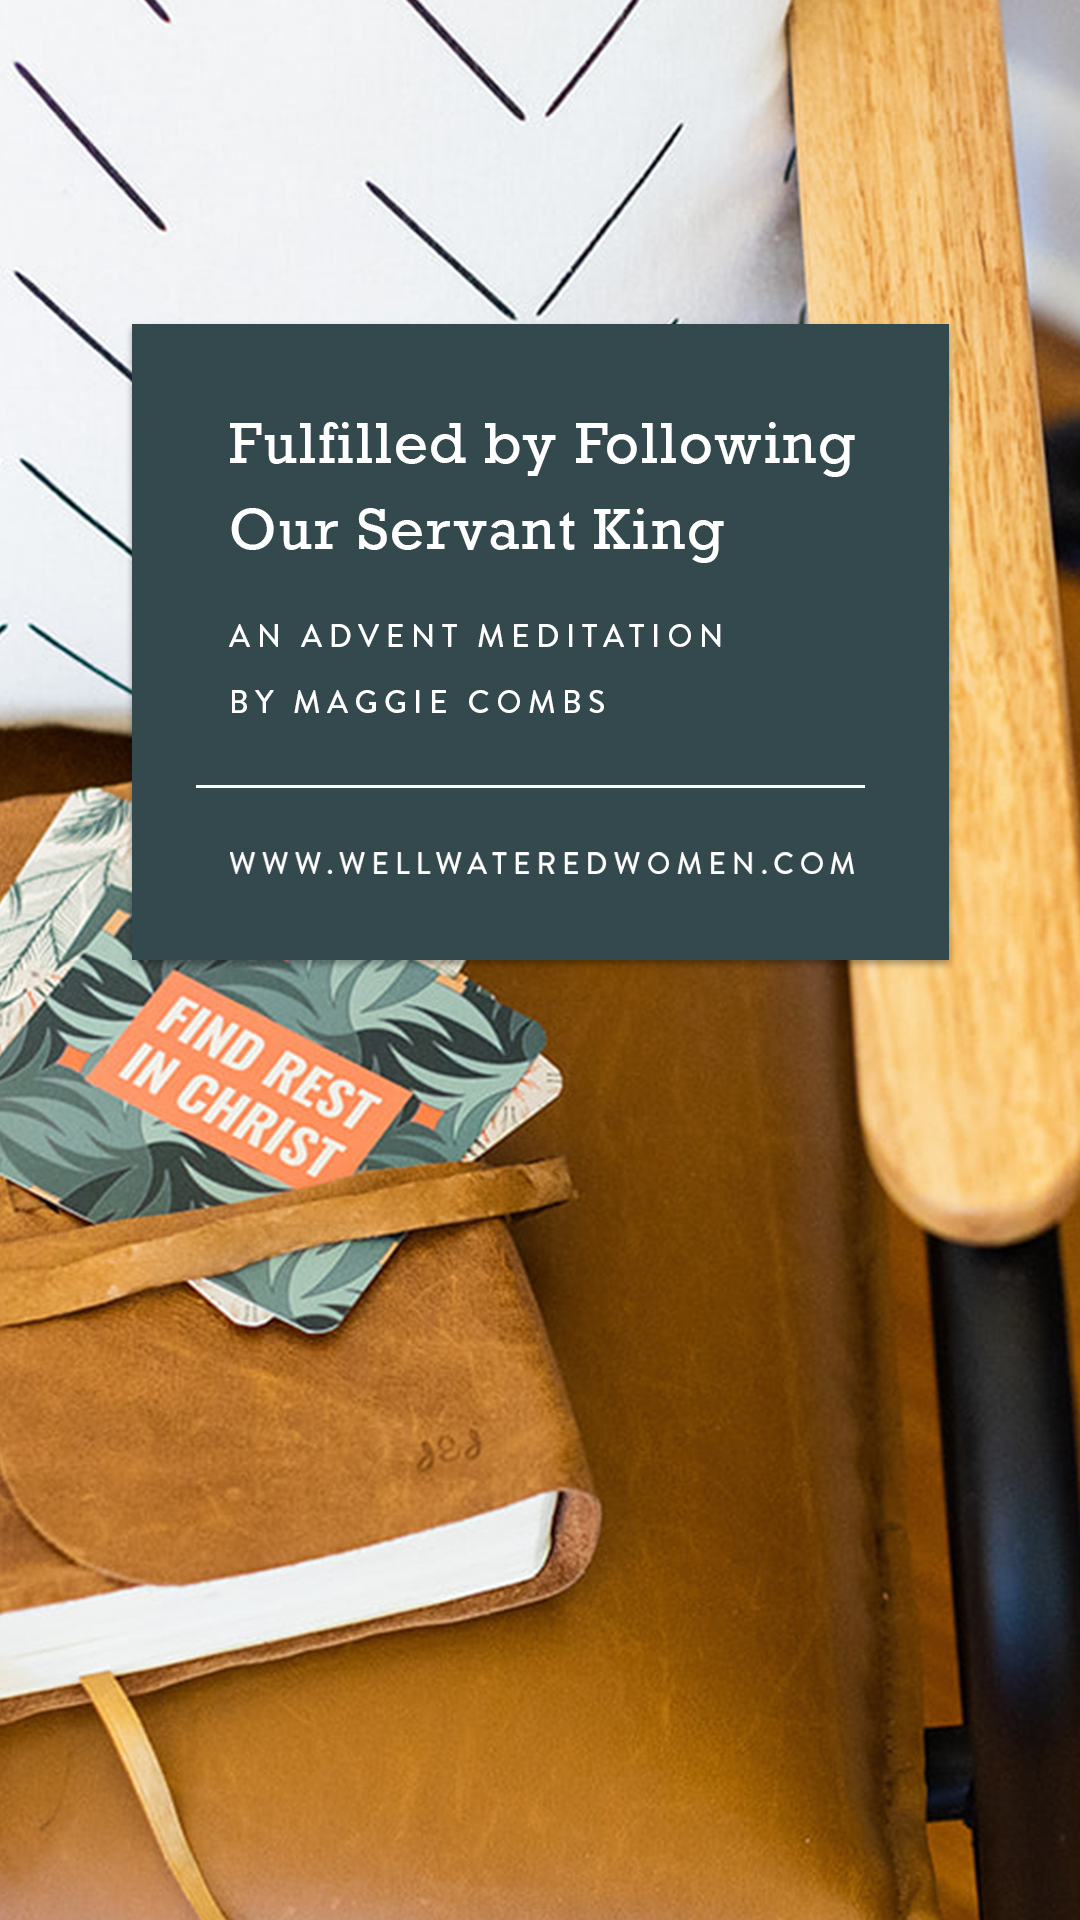 Fulfilled by Following our Servant King-an Advent Meditation from Well-Watered Women